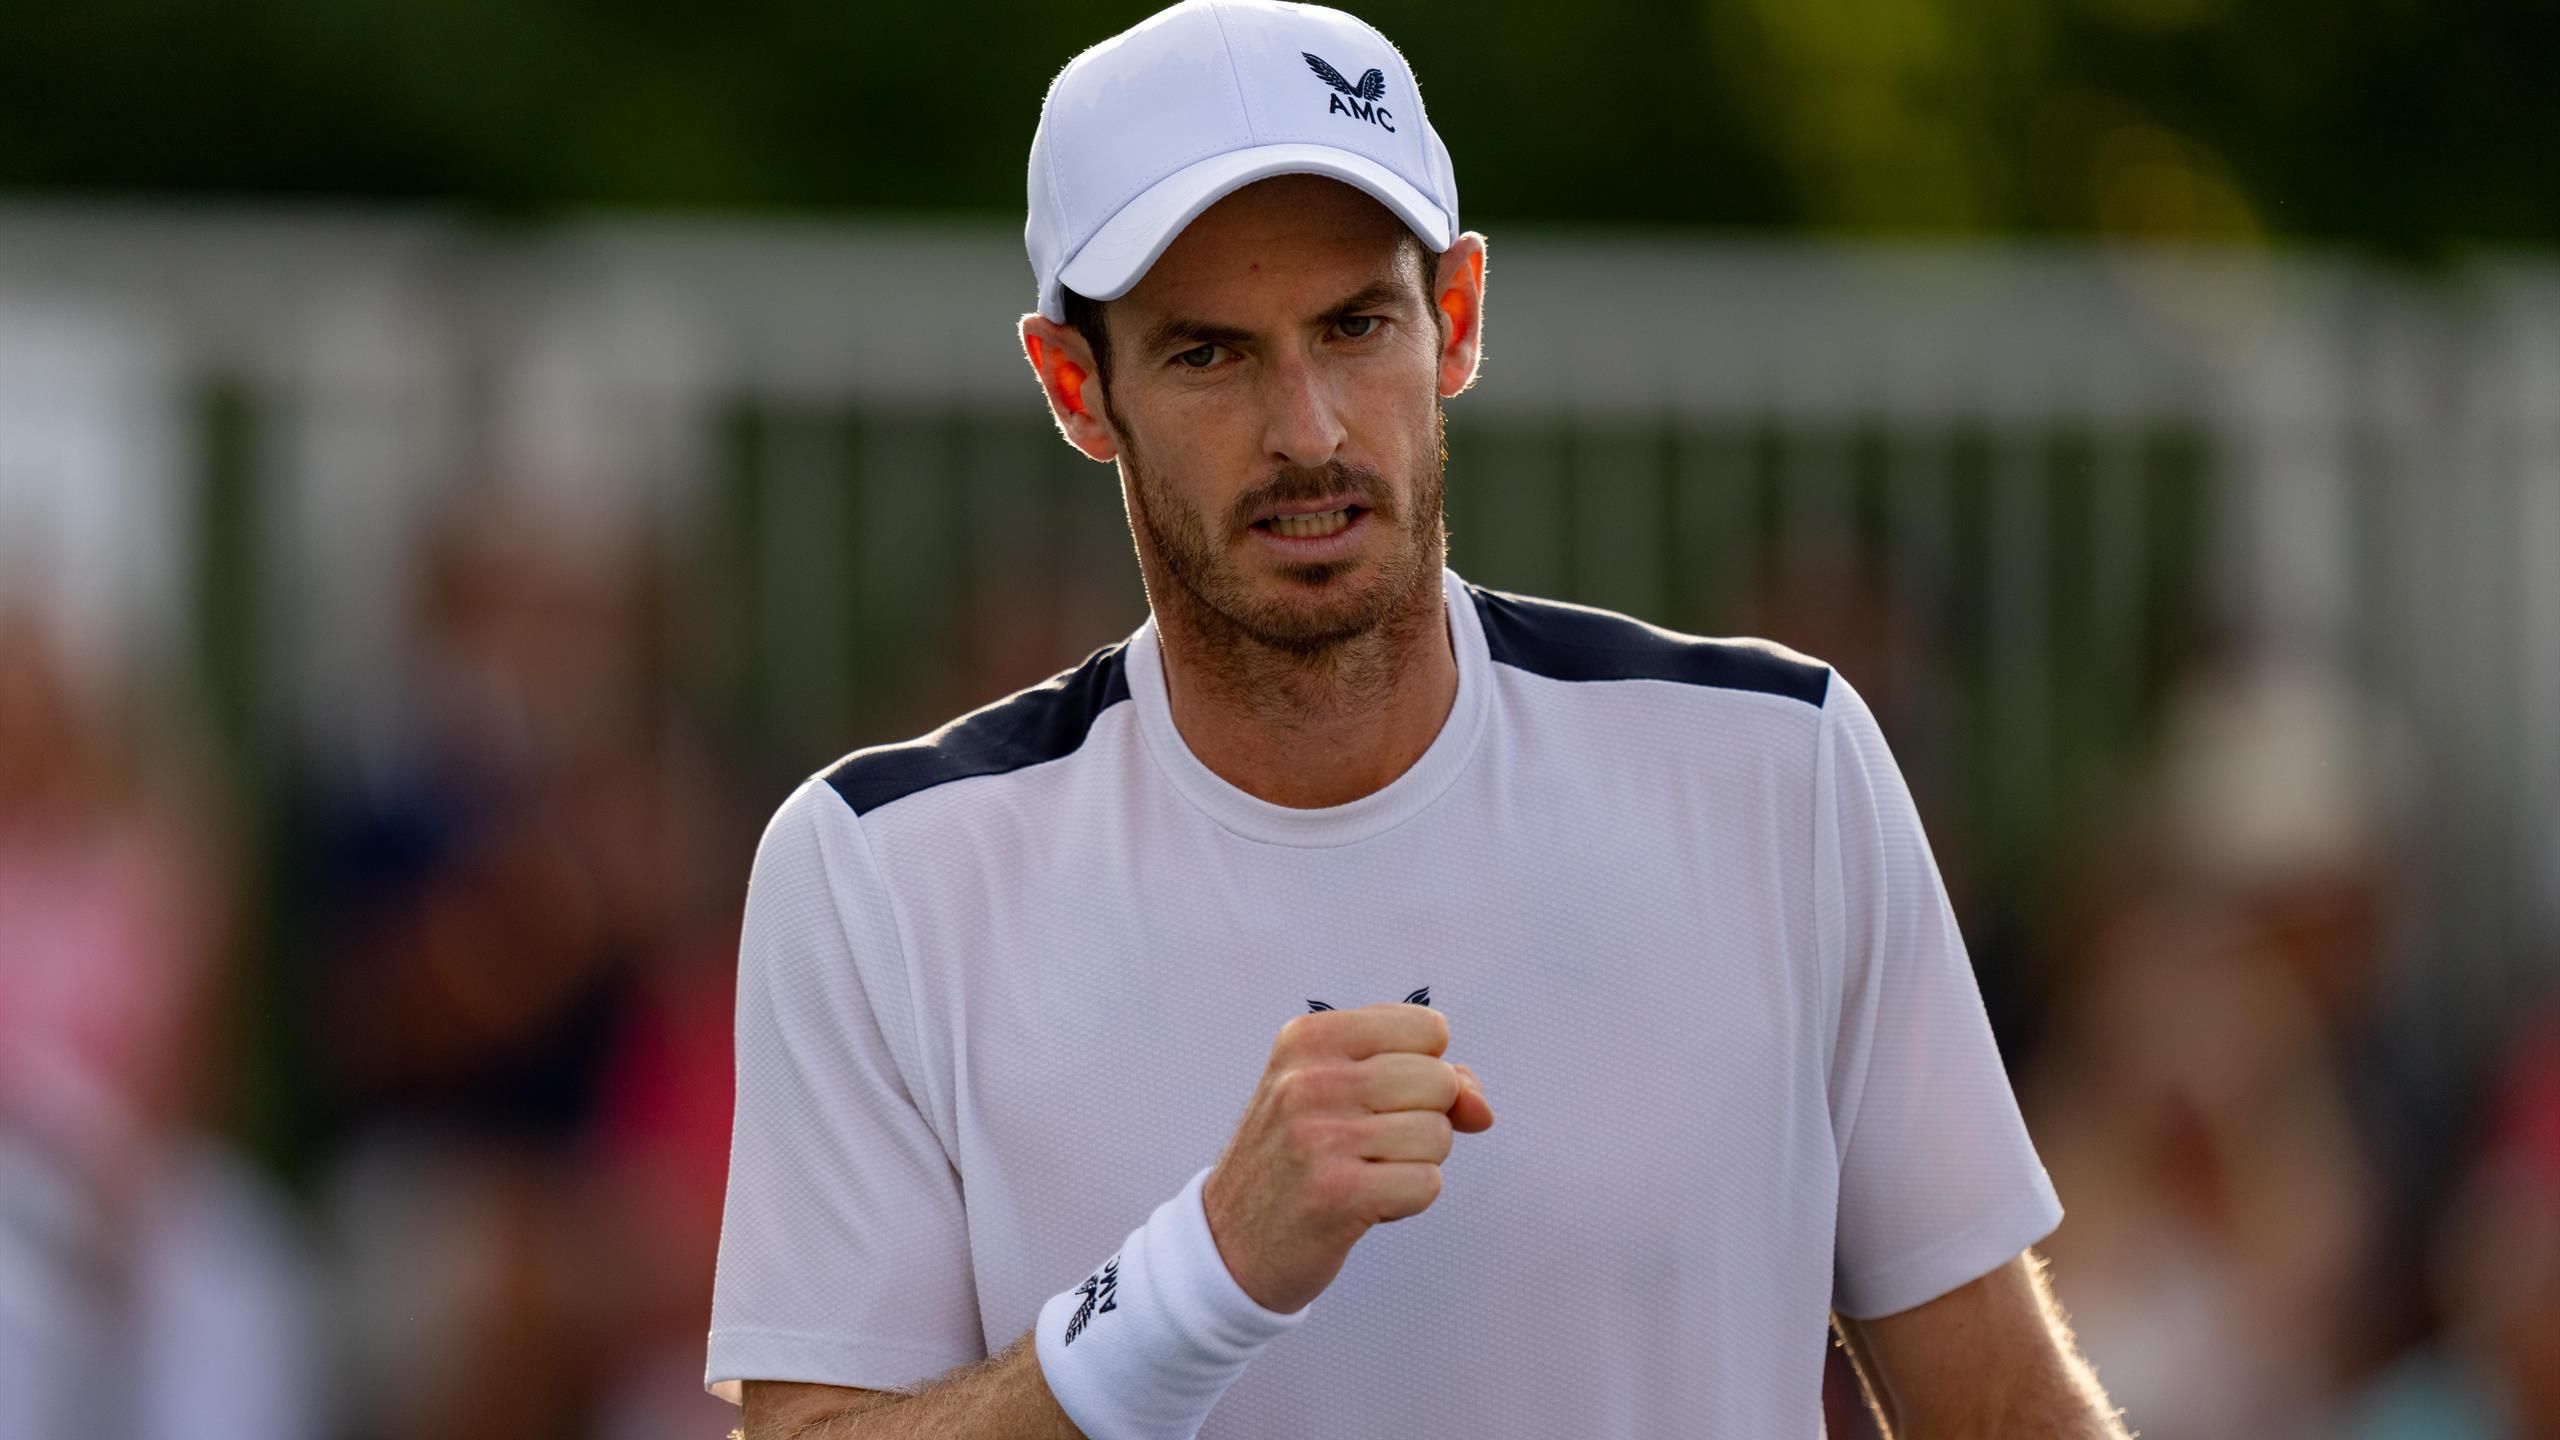 Andy Murray battles past Max Purcell and sets up Jannik Sinner showdown in last 16 at Canadian Open